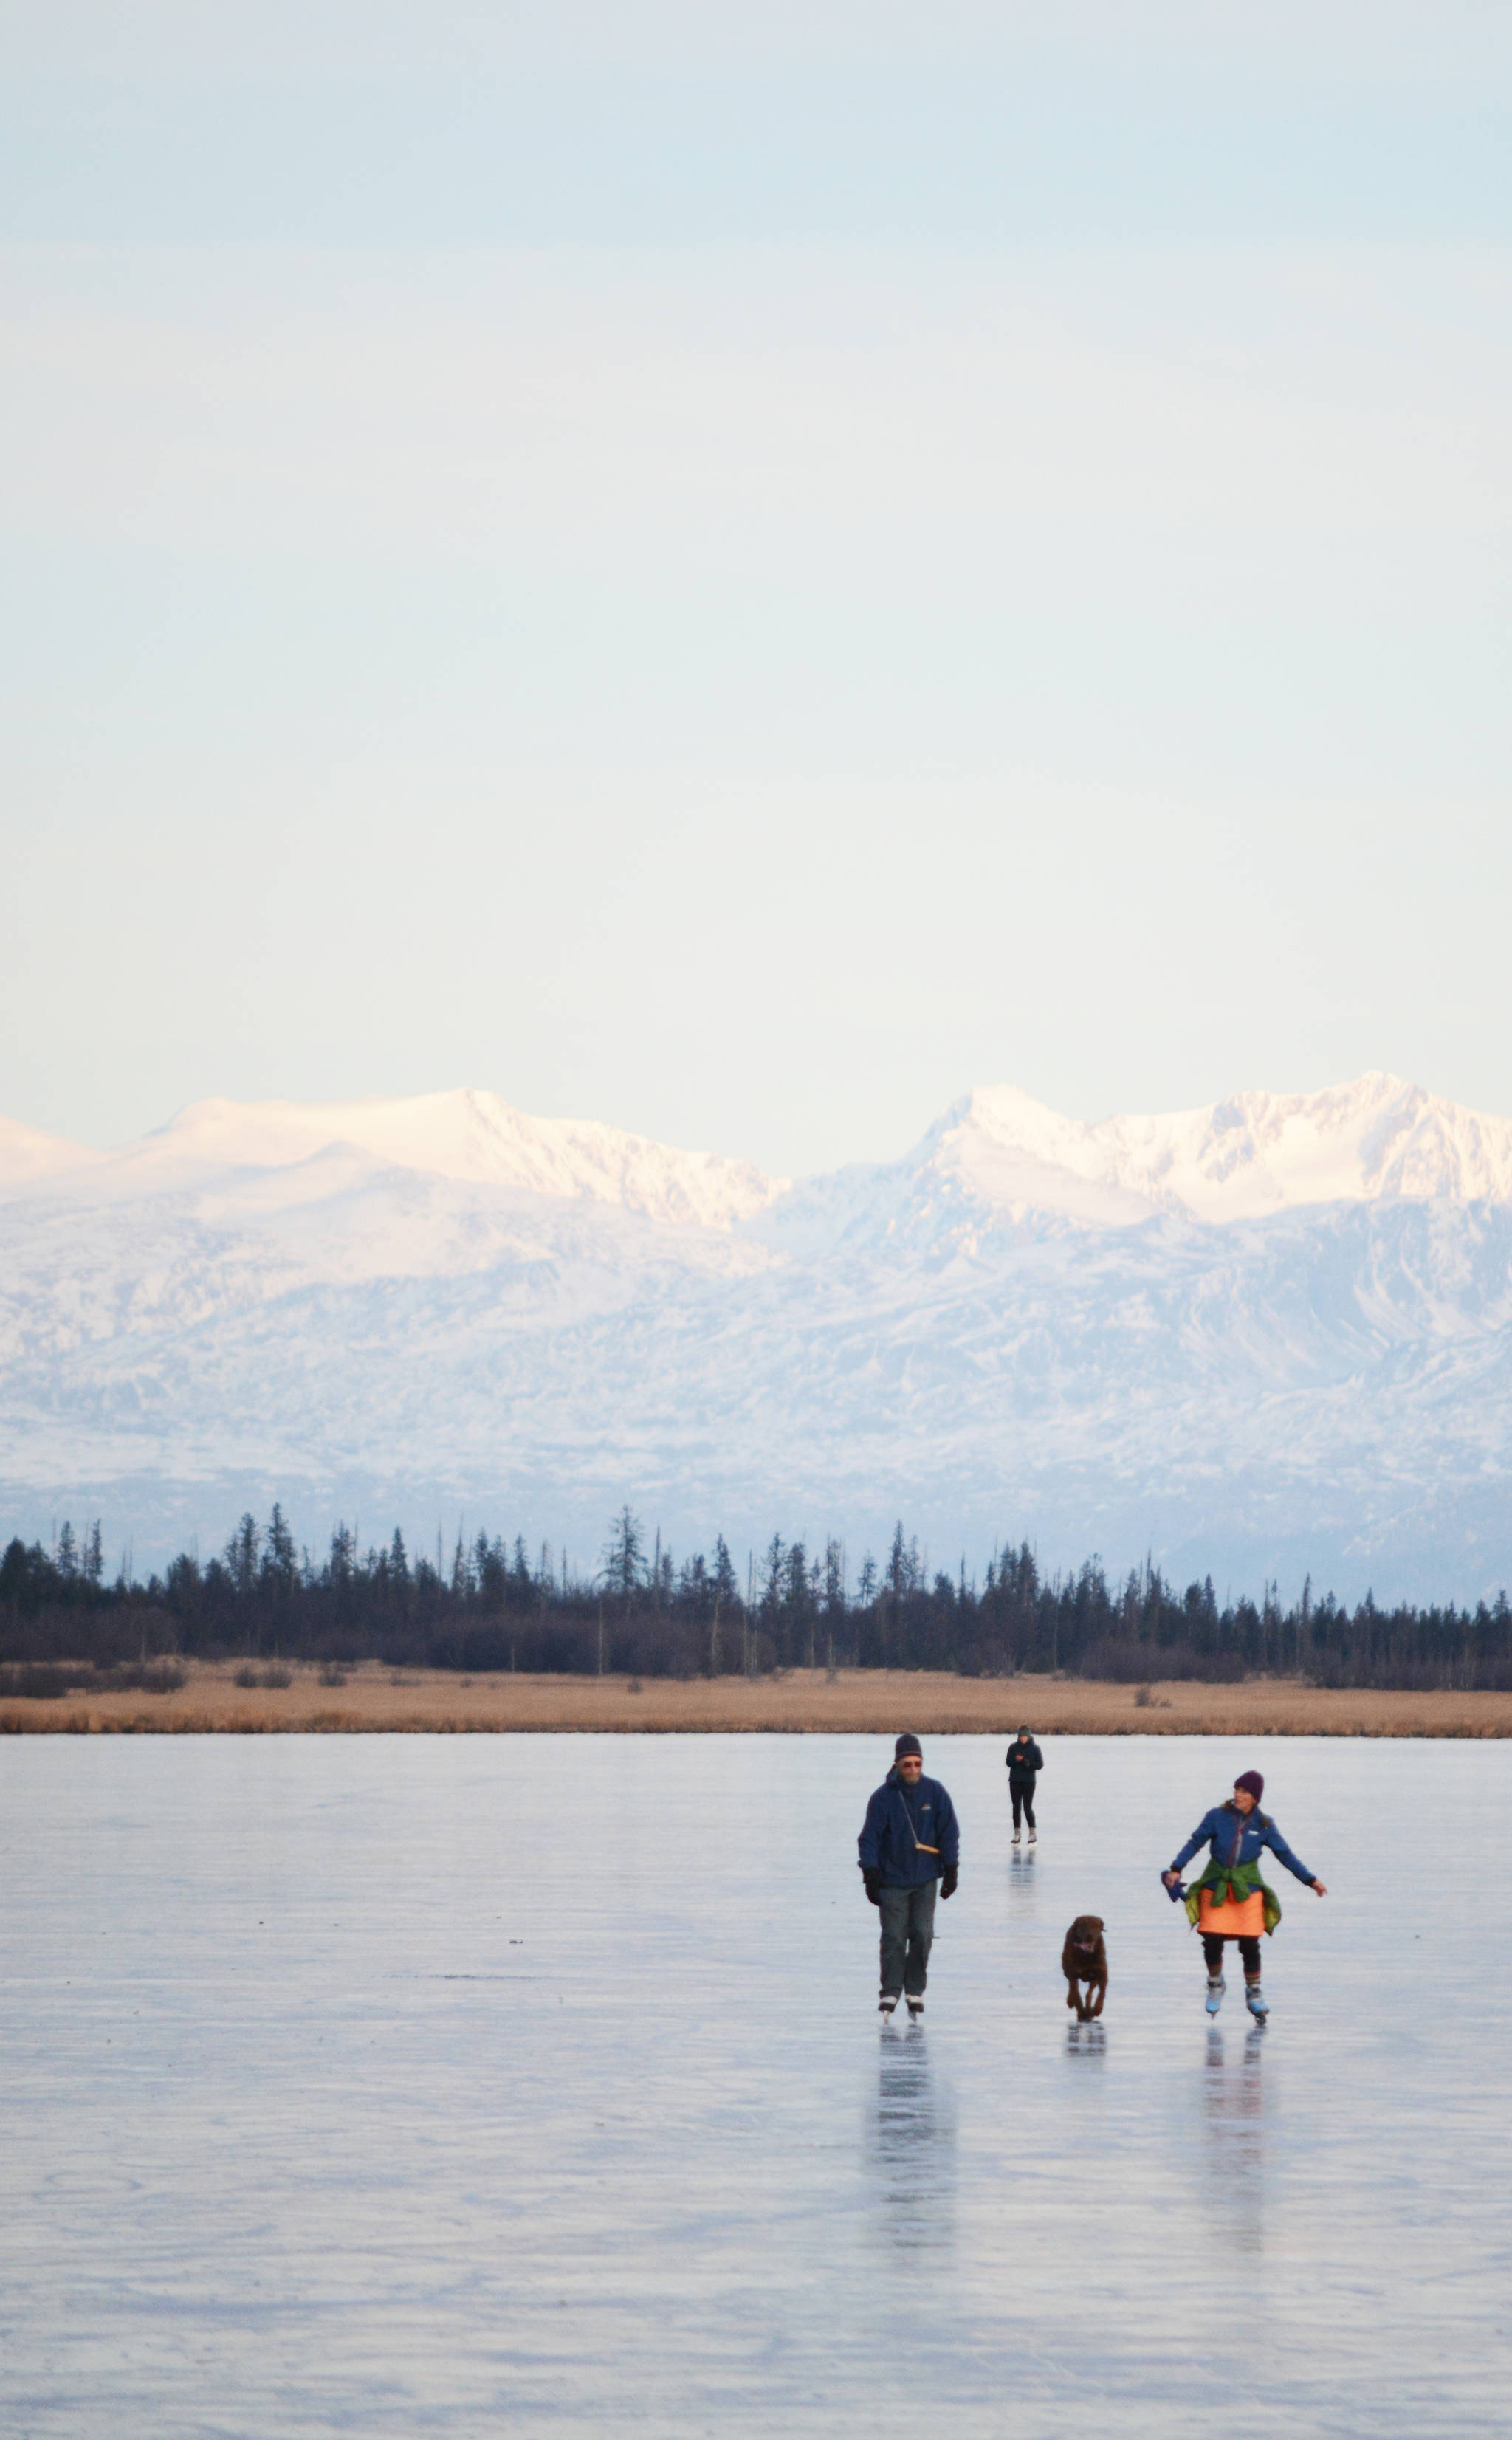 Skaters glide across Beluga Lake last Wednesday afternoon, Nov. 15, 2017 in Homer, Alaska. With clear and cold weather, the lake has frozen enough to support ice skating. A slight dusting of snow last Thursday didn’t affect skating. (Photo by Michael Armstrong, Homer News)